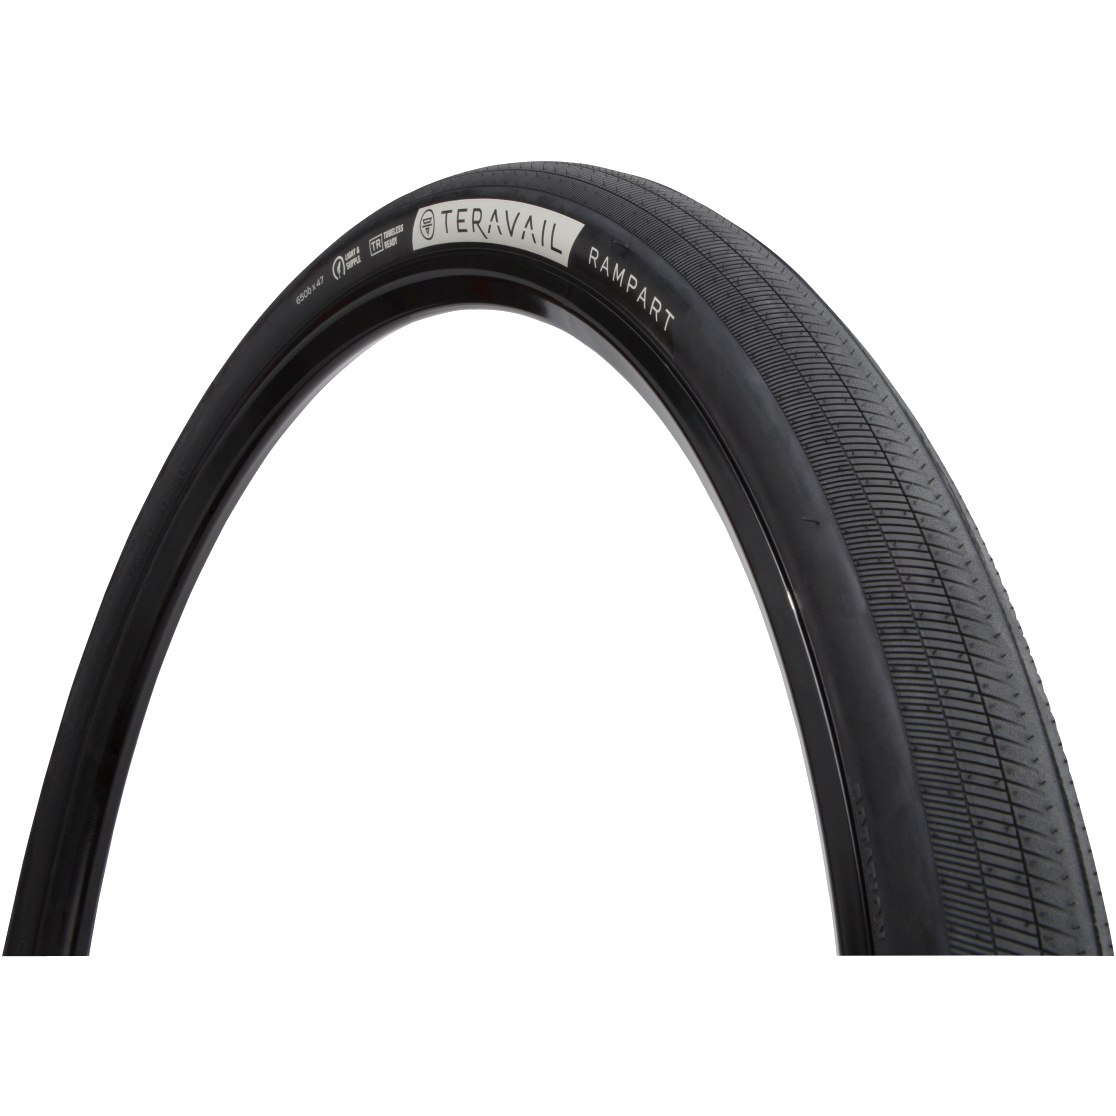 Picture of Teravail Rampart Folding Tire - Light and Supple - 47-584 - black